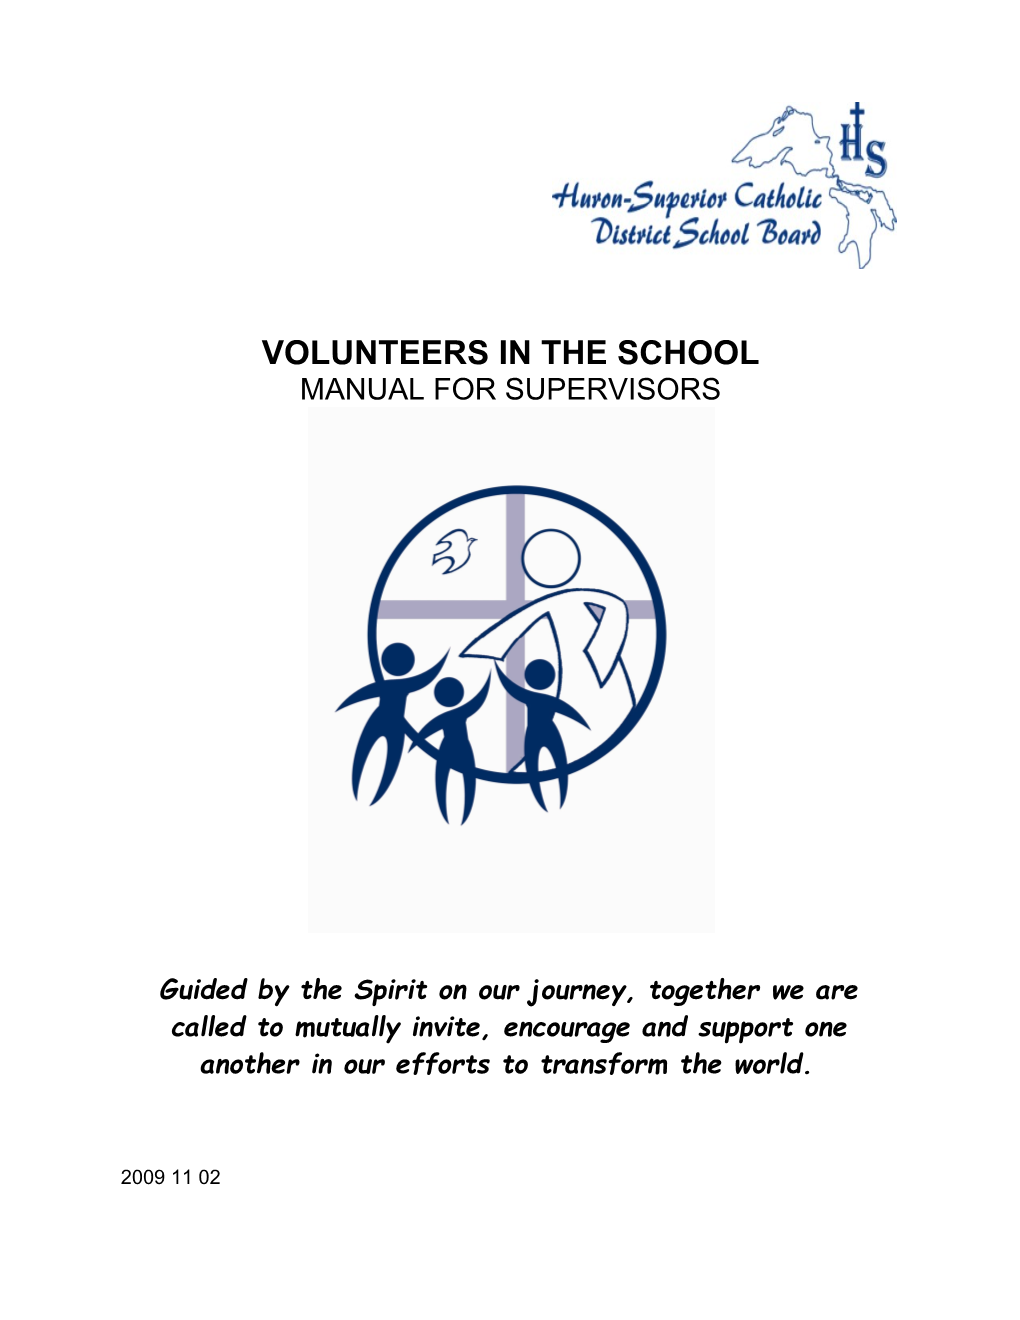 Page1 - Volunteers in the School - Manual for Supervisors